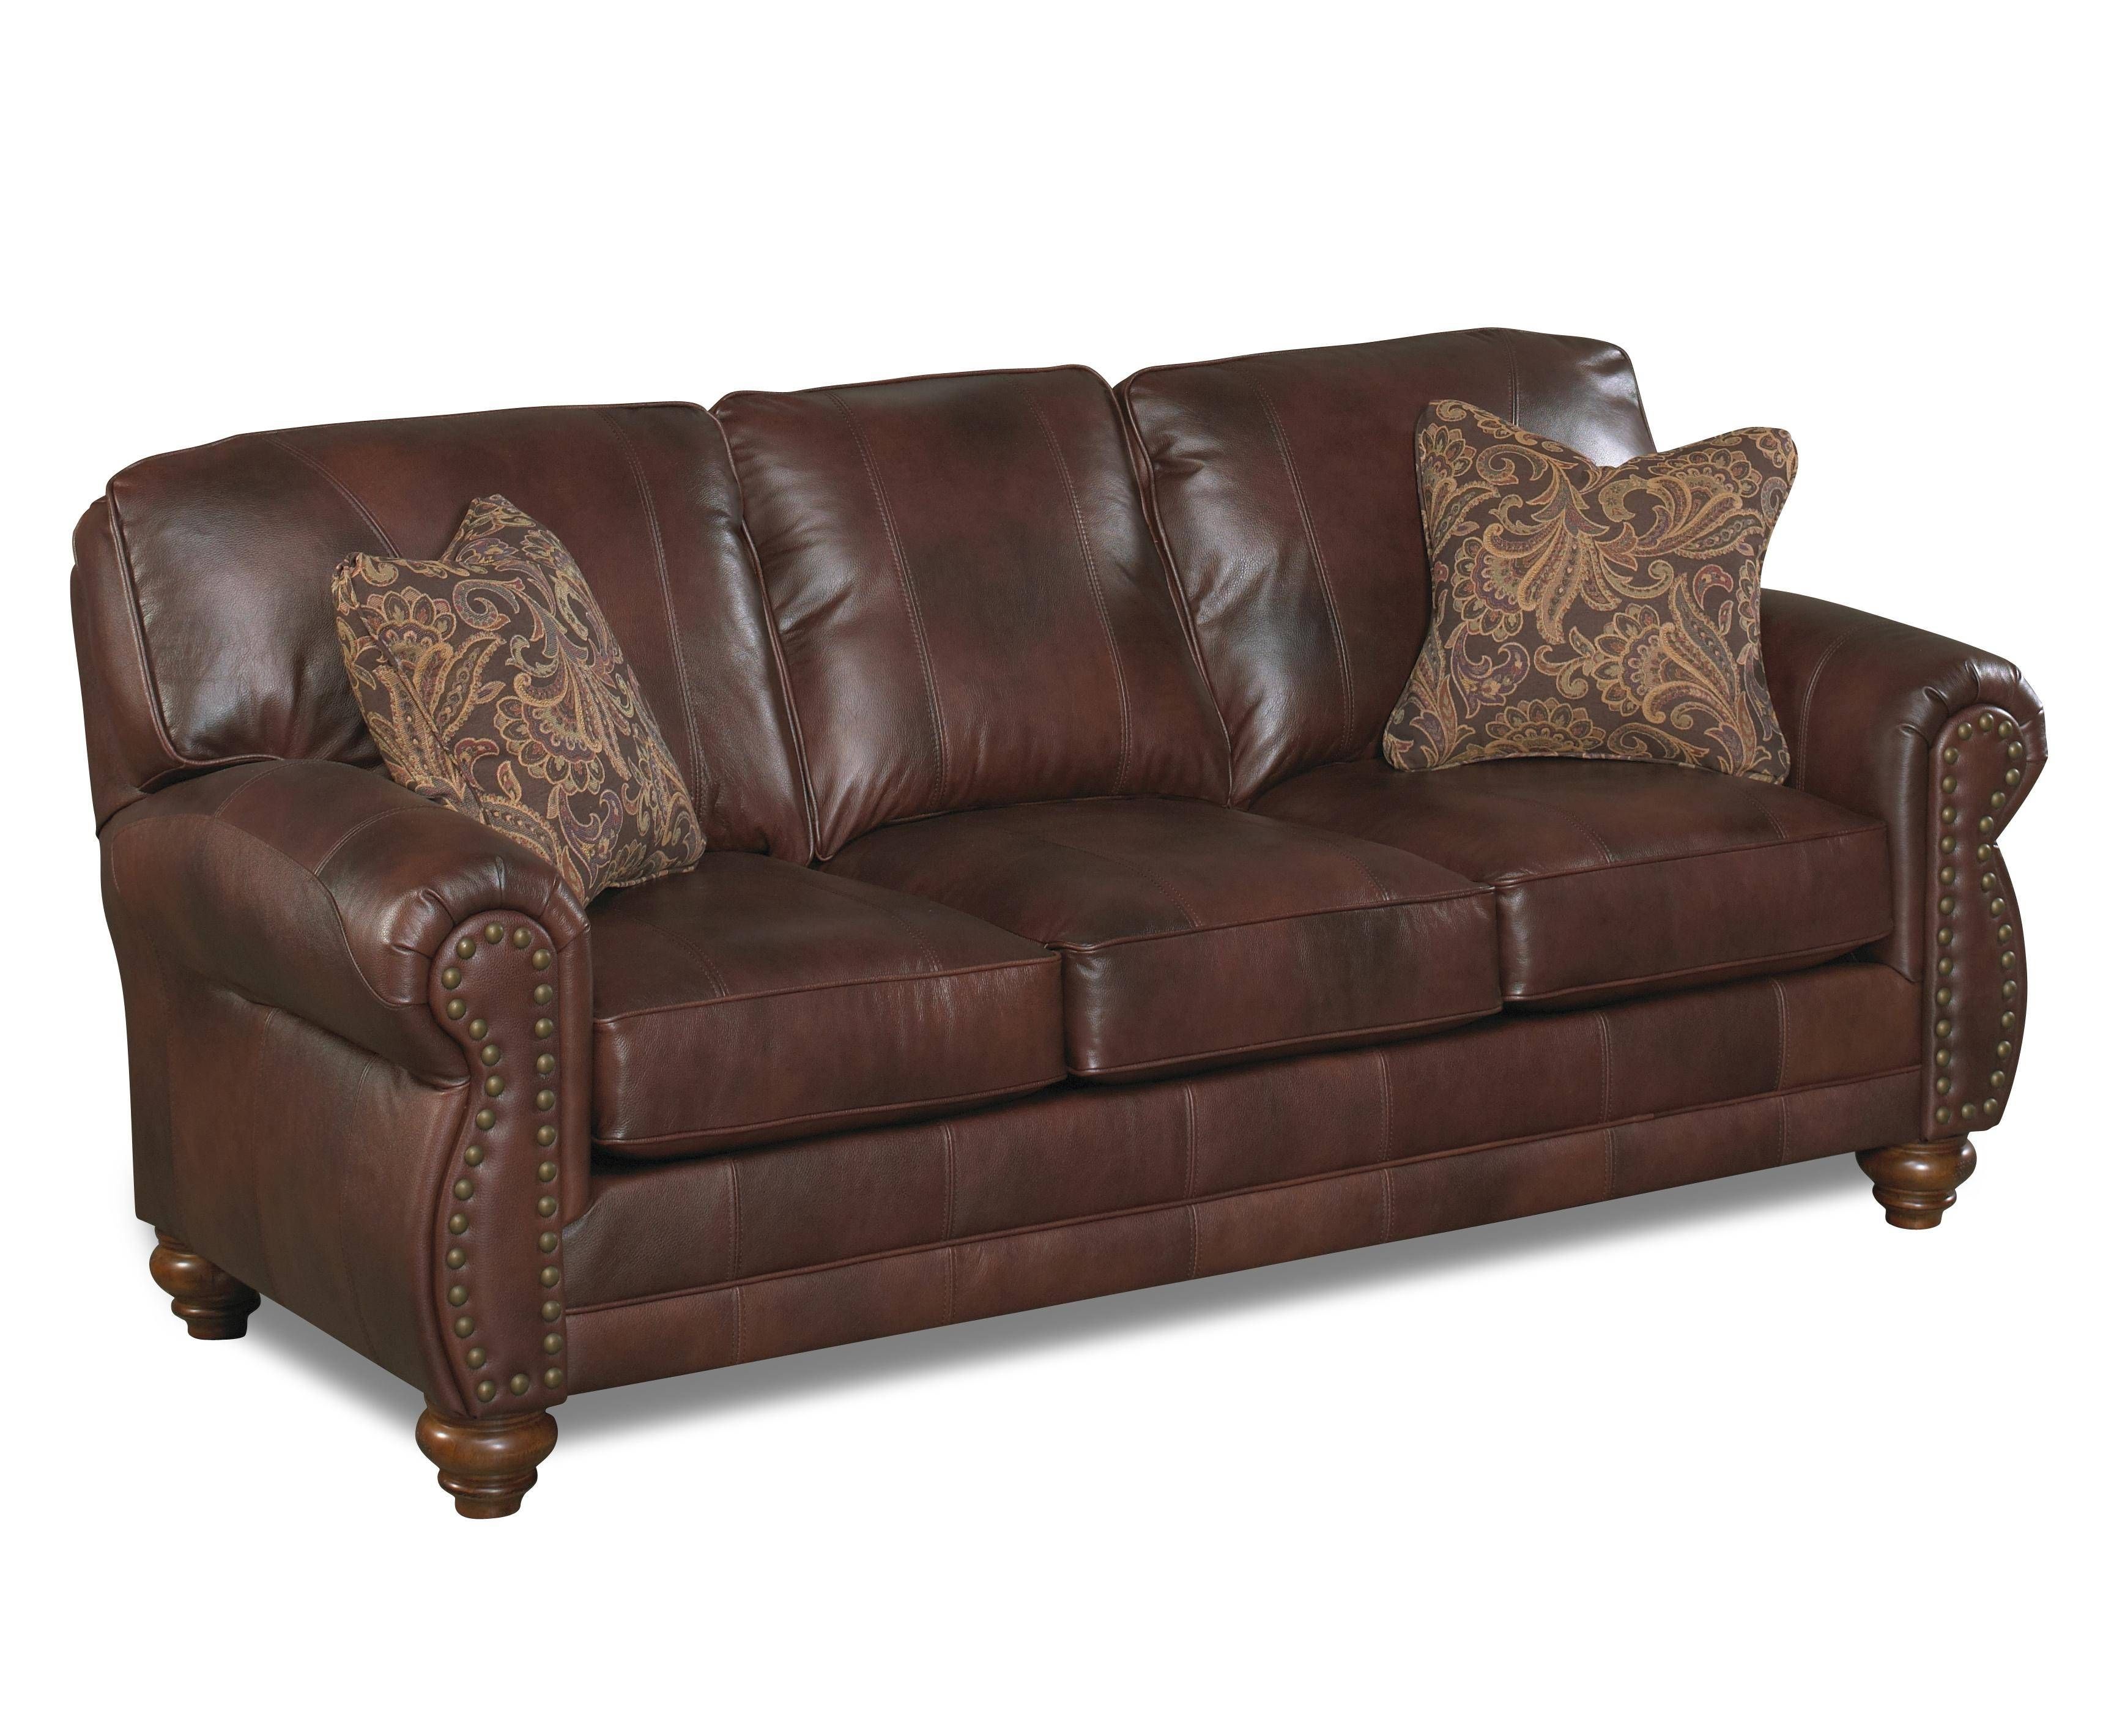 best price for faux leather sofa & best rating